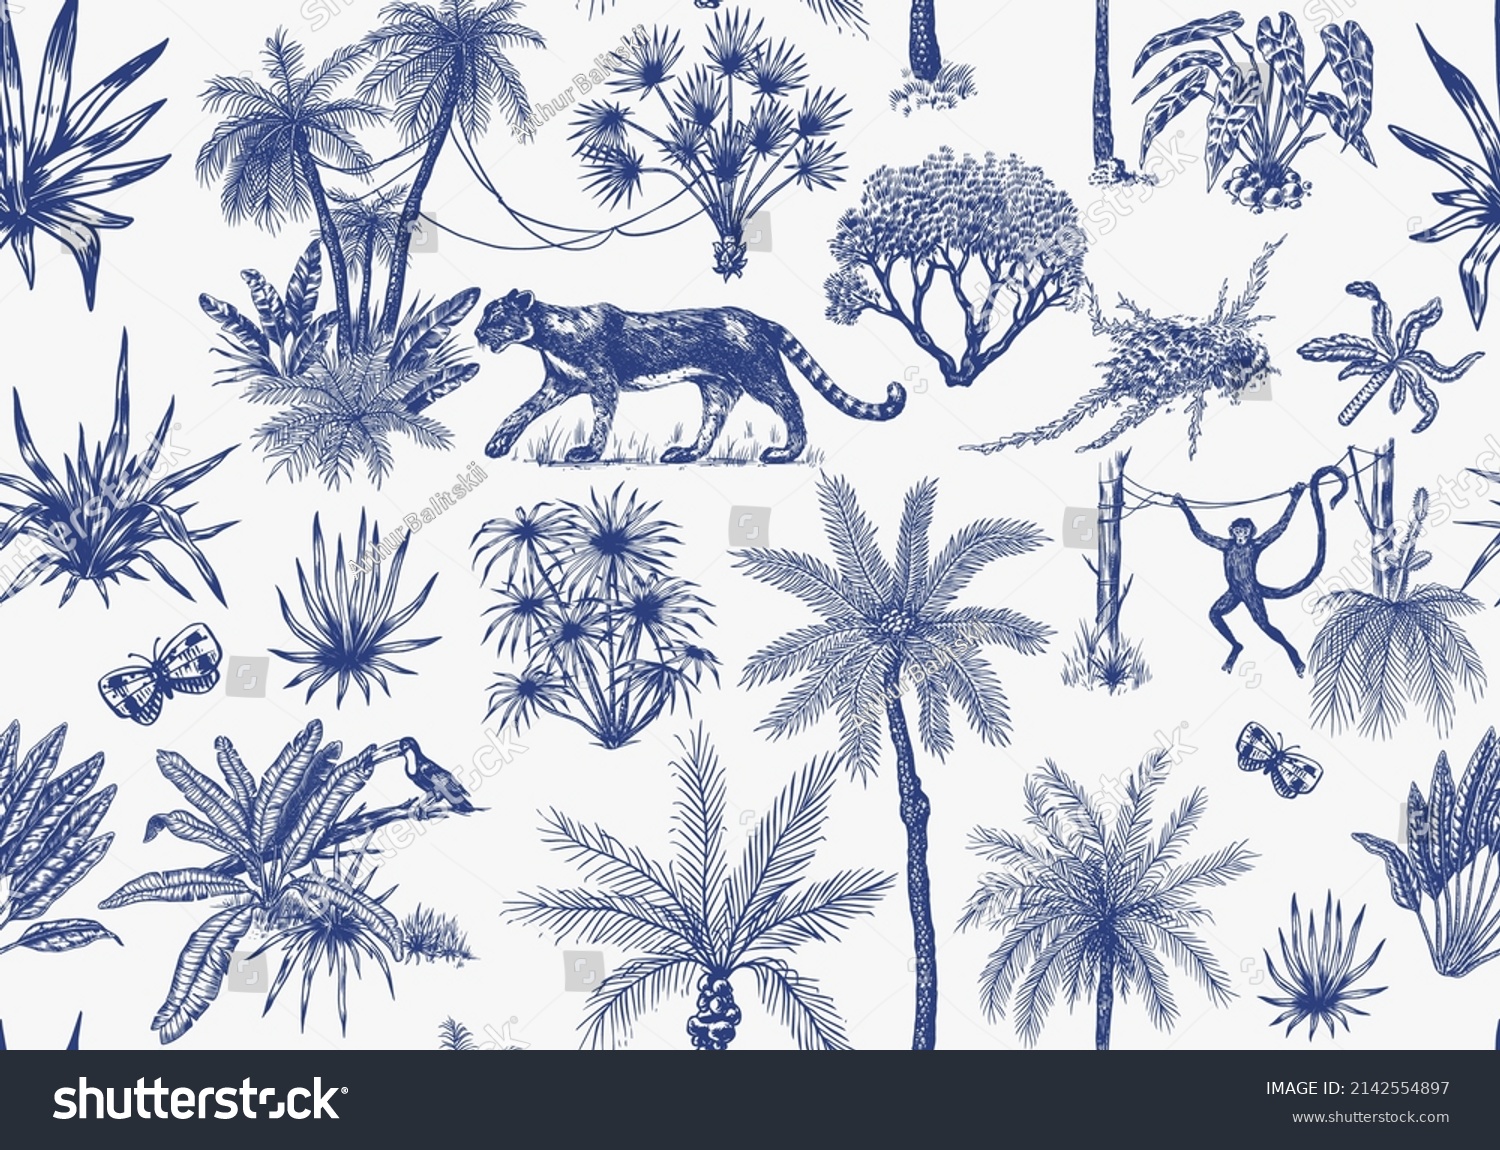 Toile De Jouy banner. Wild tiger and exotic plants. Seamless pattern. Toucan bird and monkey. Exotic Tropical trees. Eastern landscape. Linear Jungle. Hand drawn sketch in vintage style. #2142554897